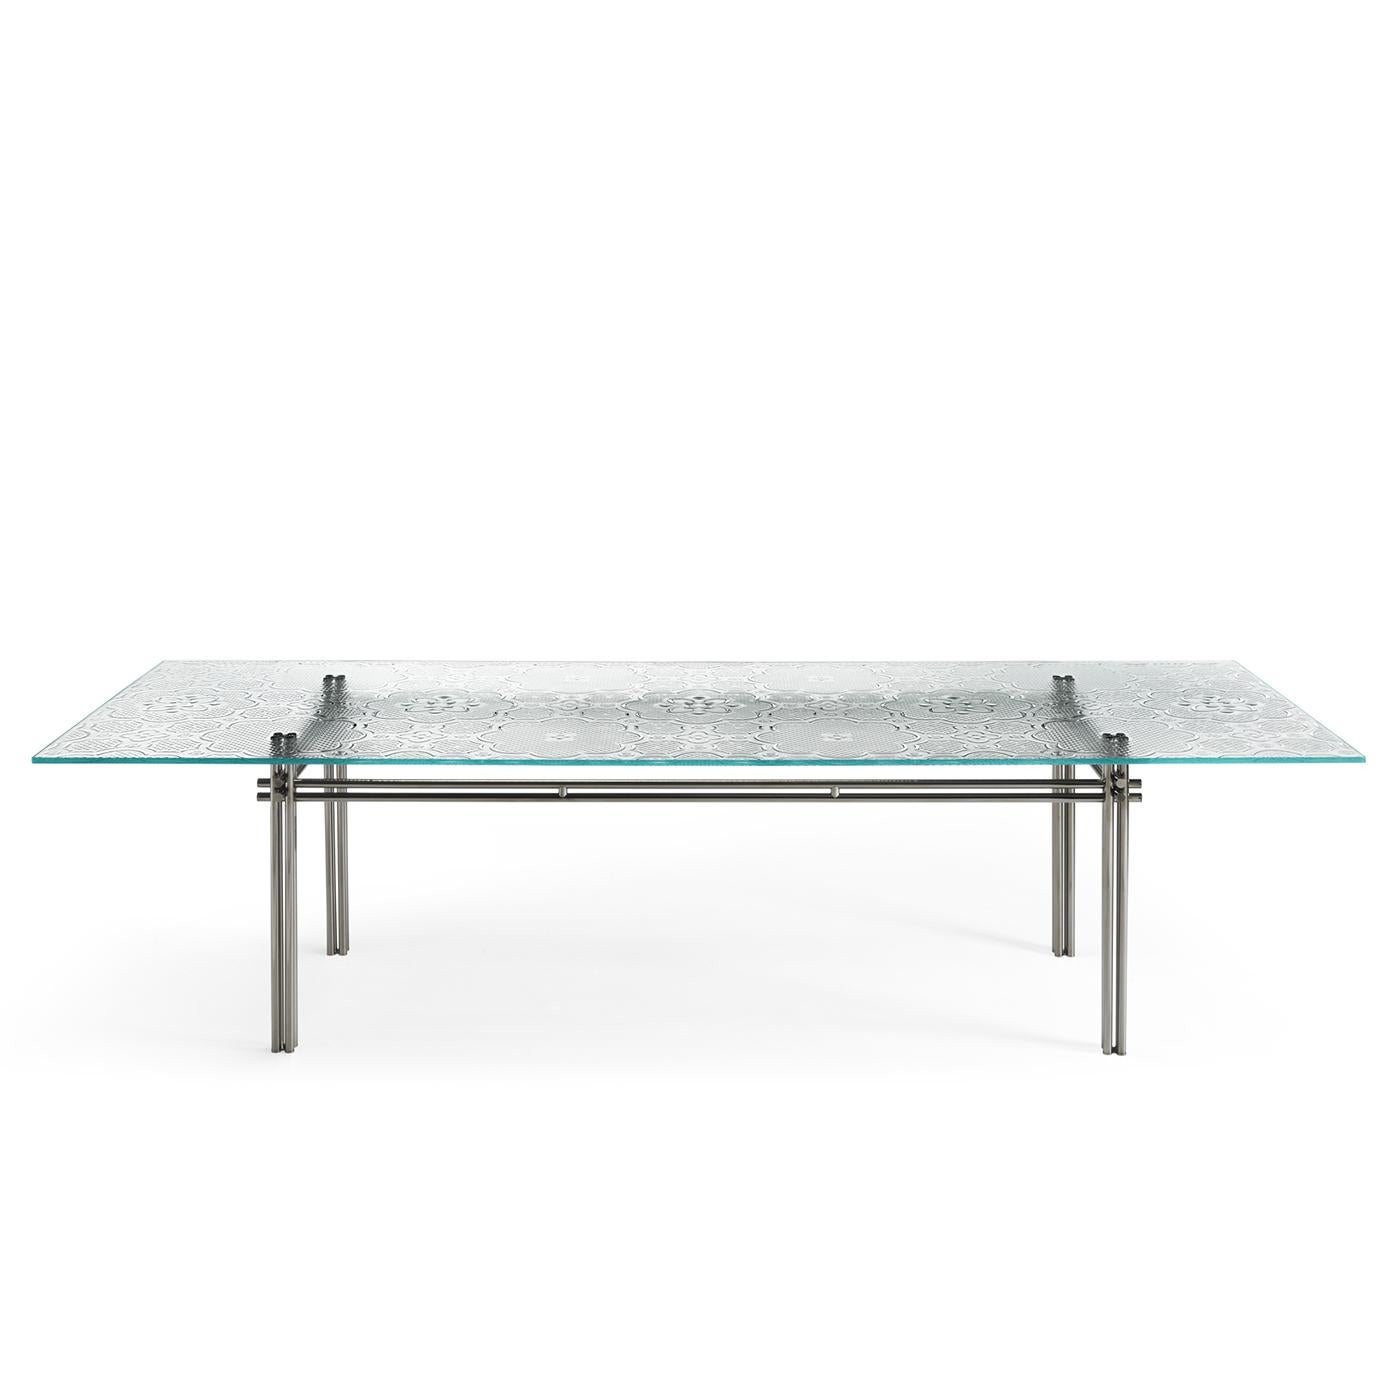 Dining Table Source Glass with fused engraved glass top,
15 mm thickness. With steel base in nickel finish.
Also available with steel base in steel in black finish, on request.